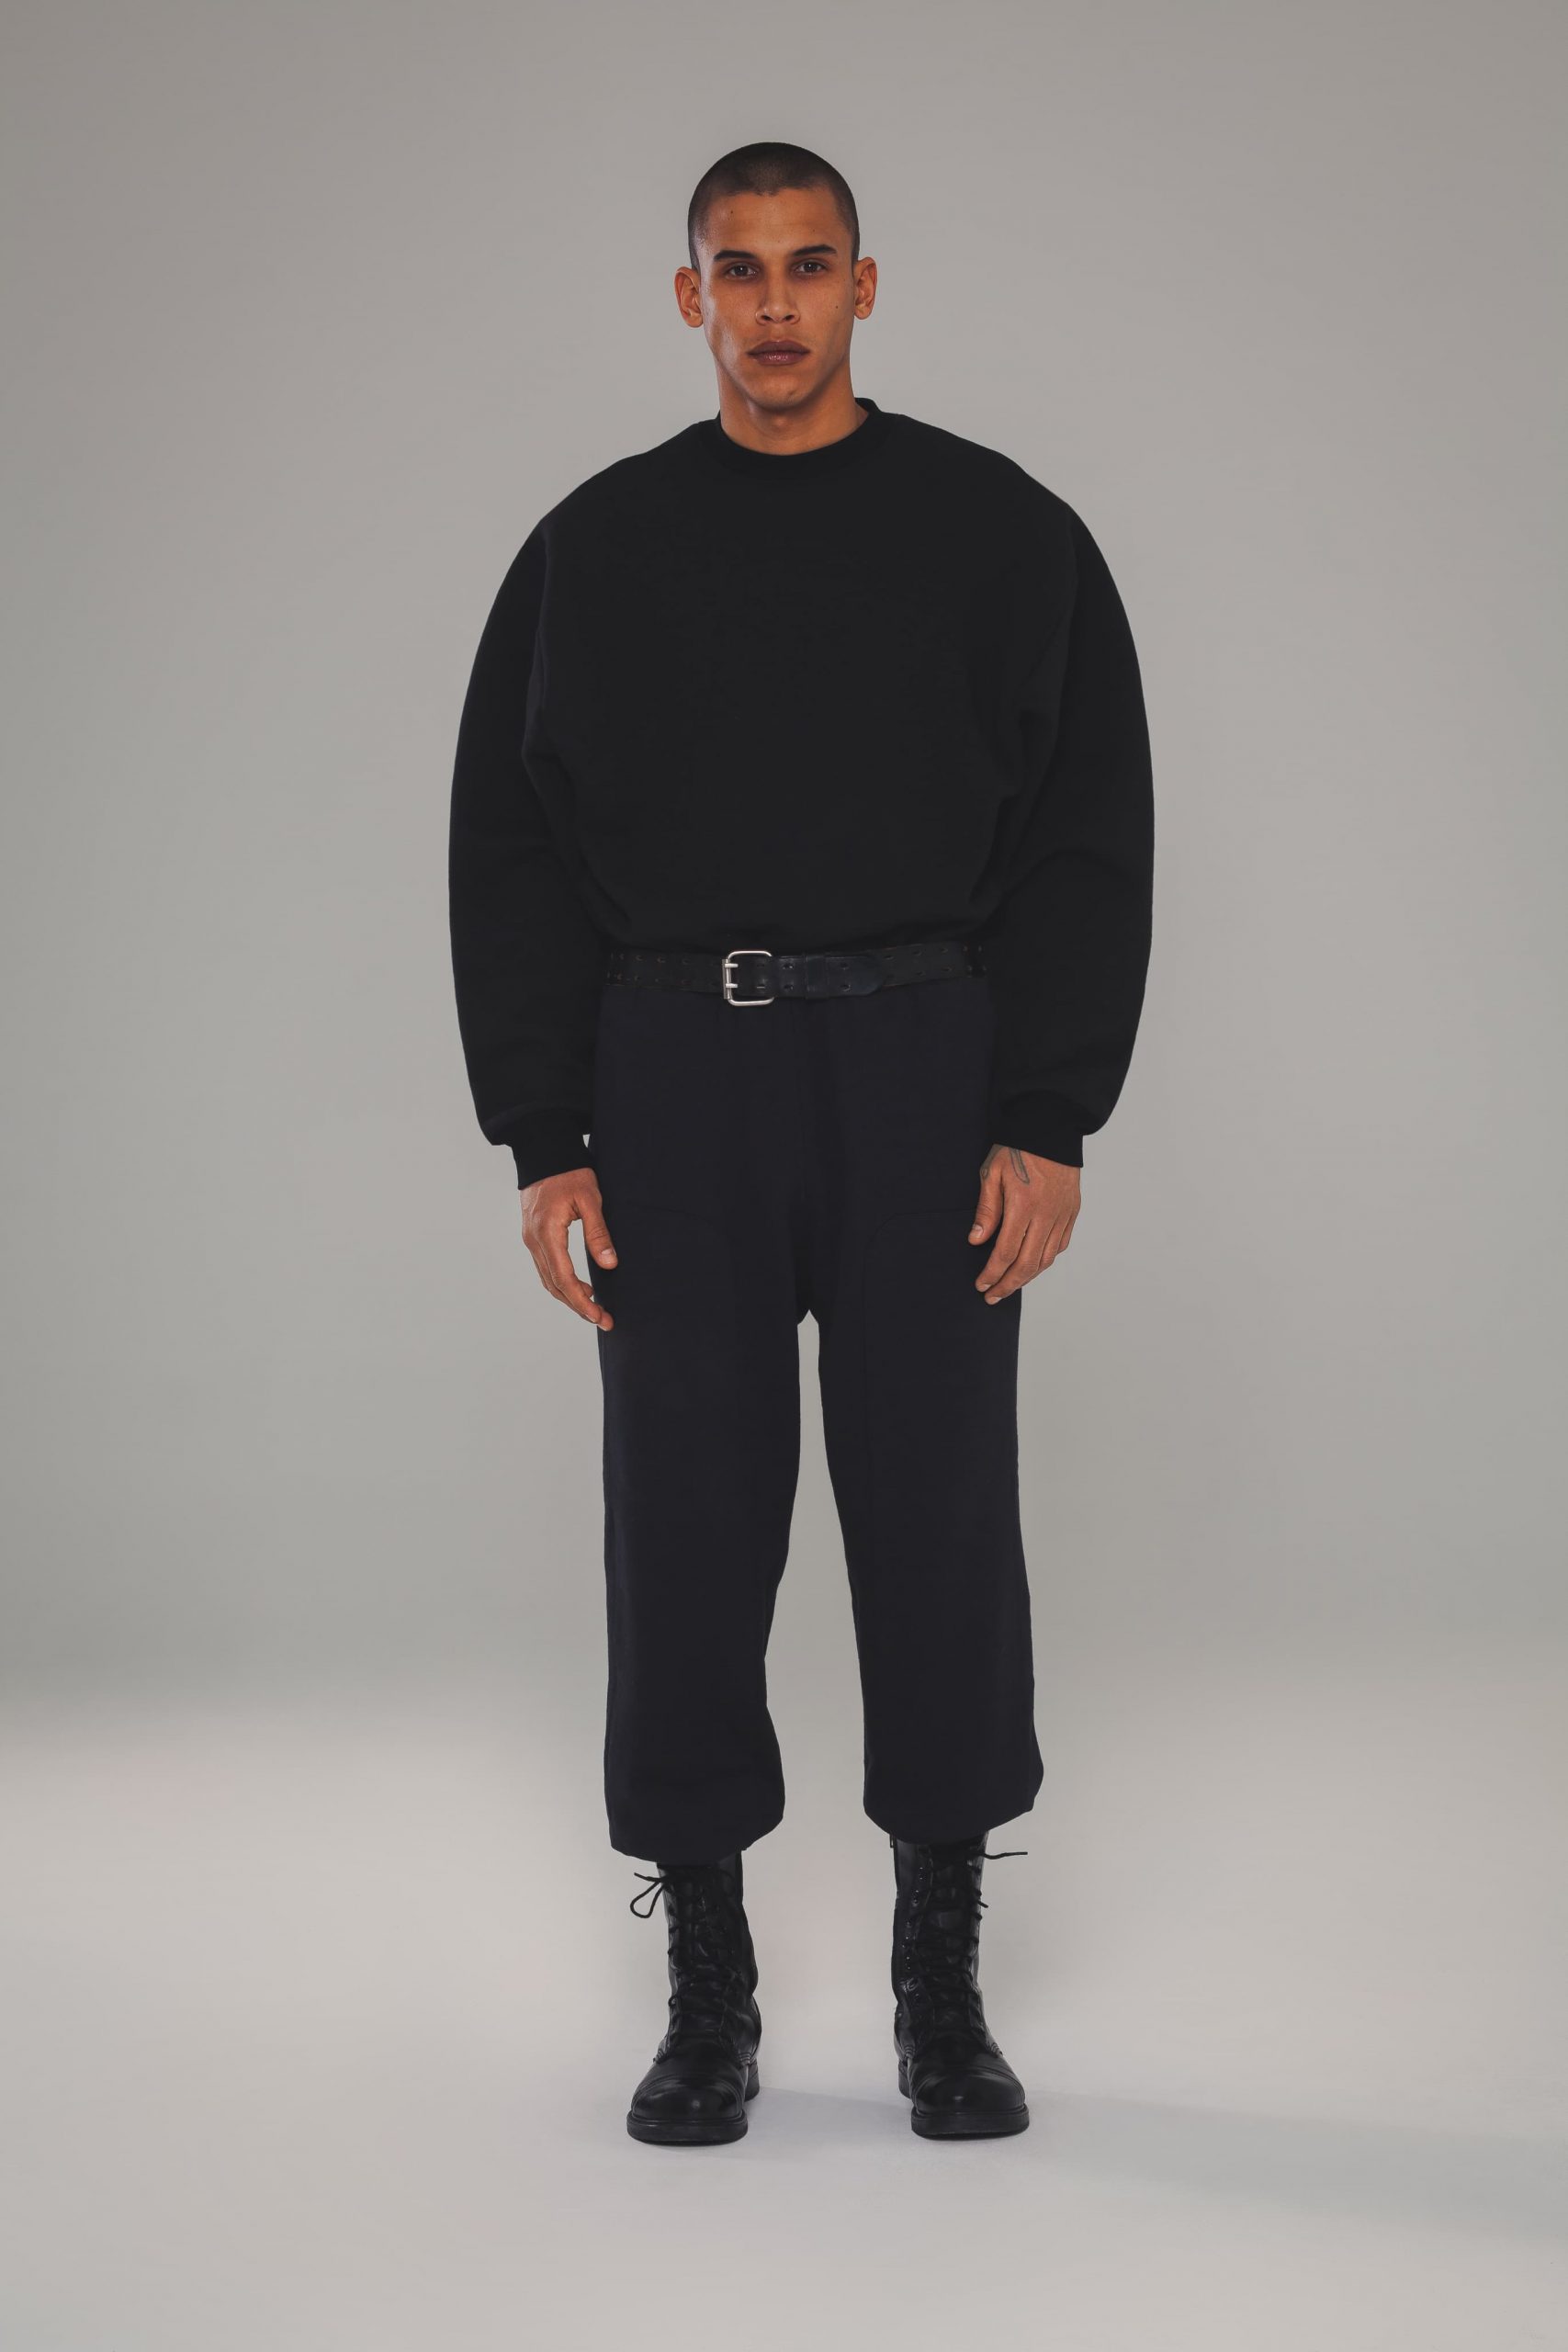 Willy Chavarria Fall 2021 Men's | The Impression